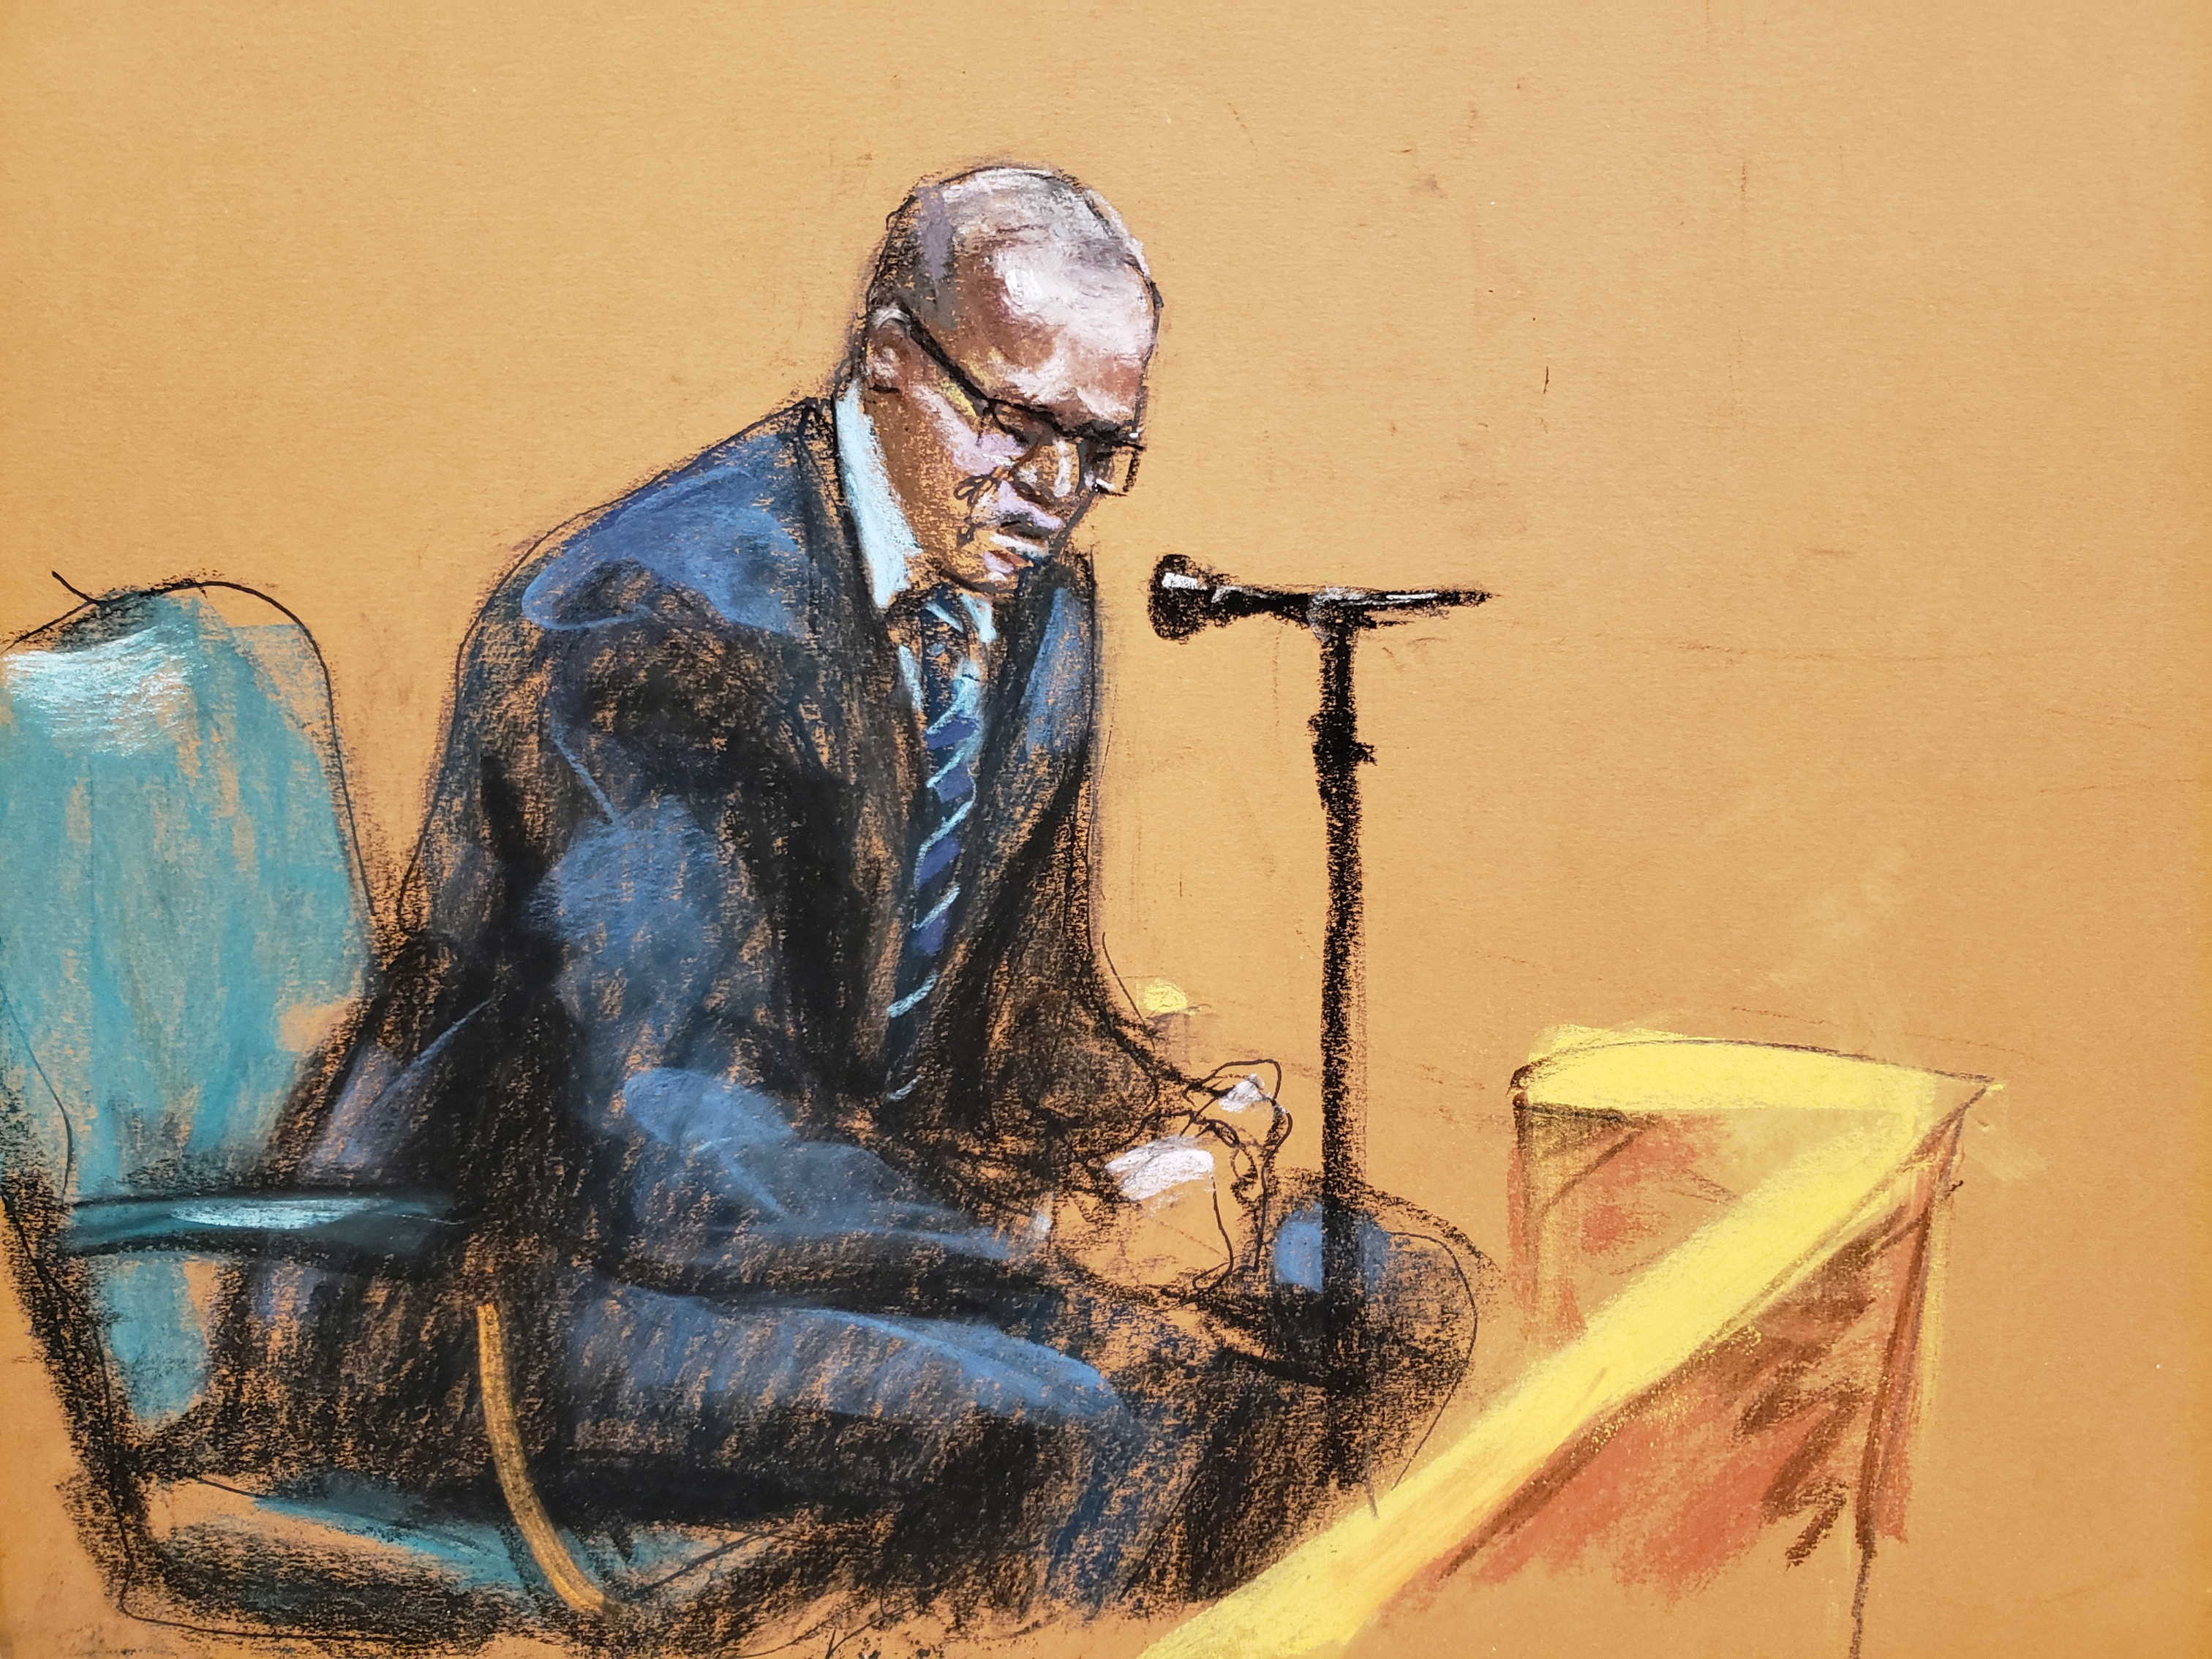 R. Kelly trial continues